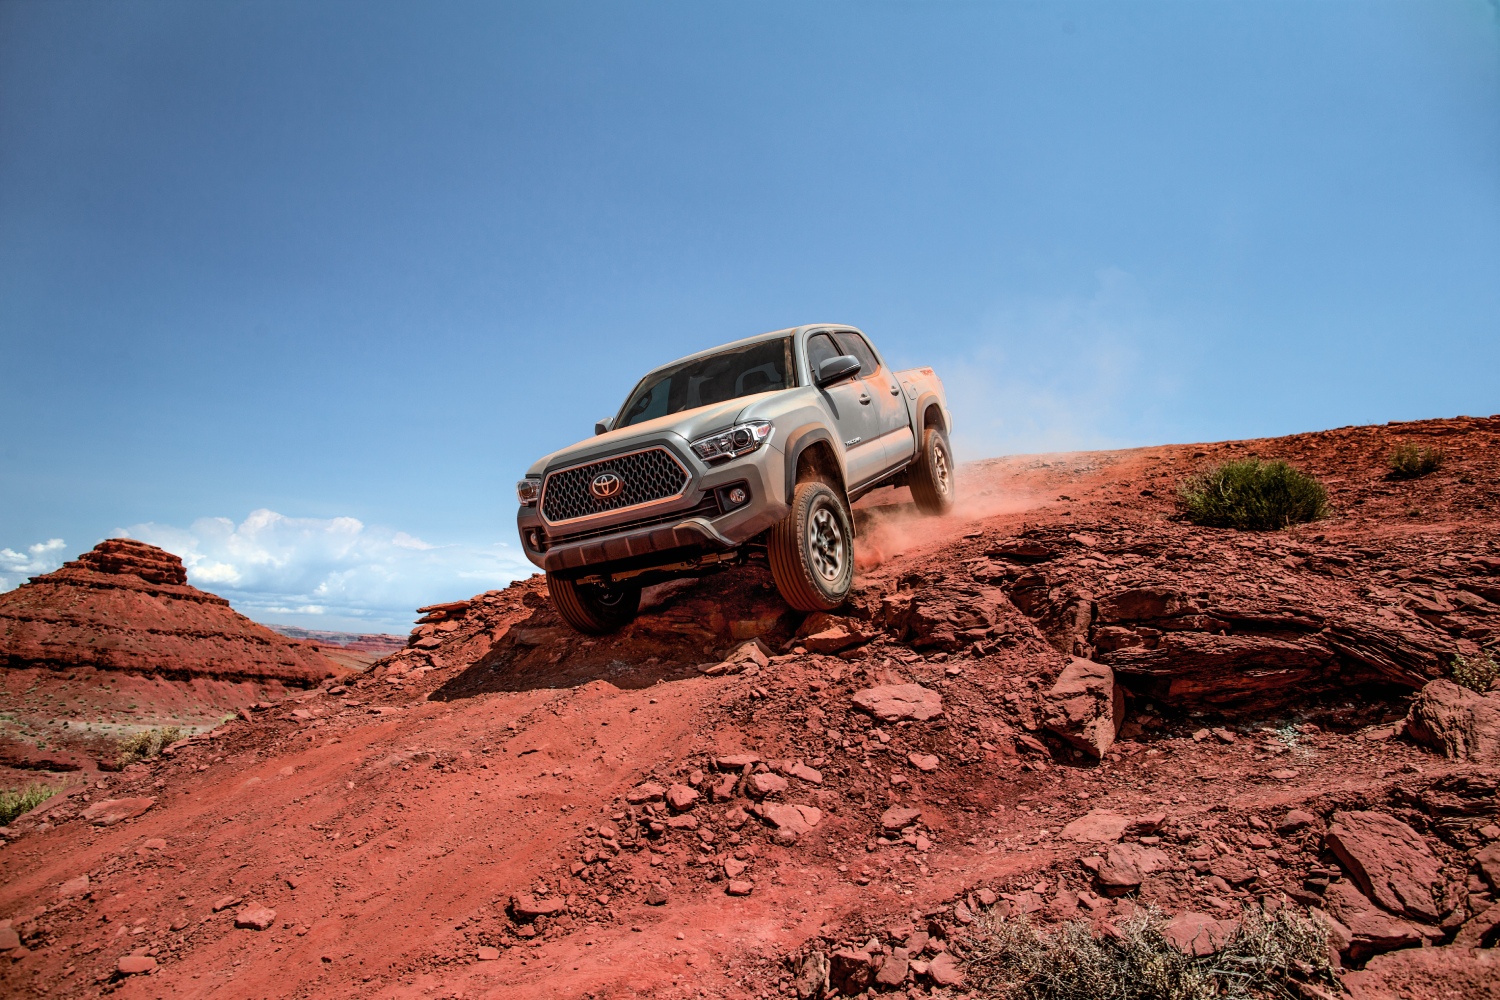 The most dependable 2018 pickups like the Toyota Tacoma